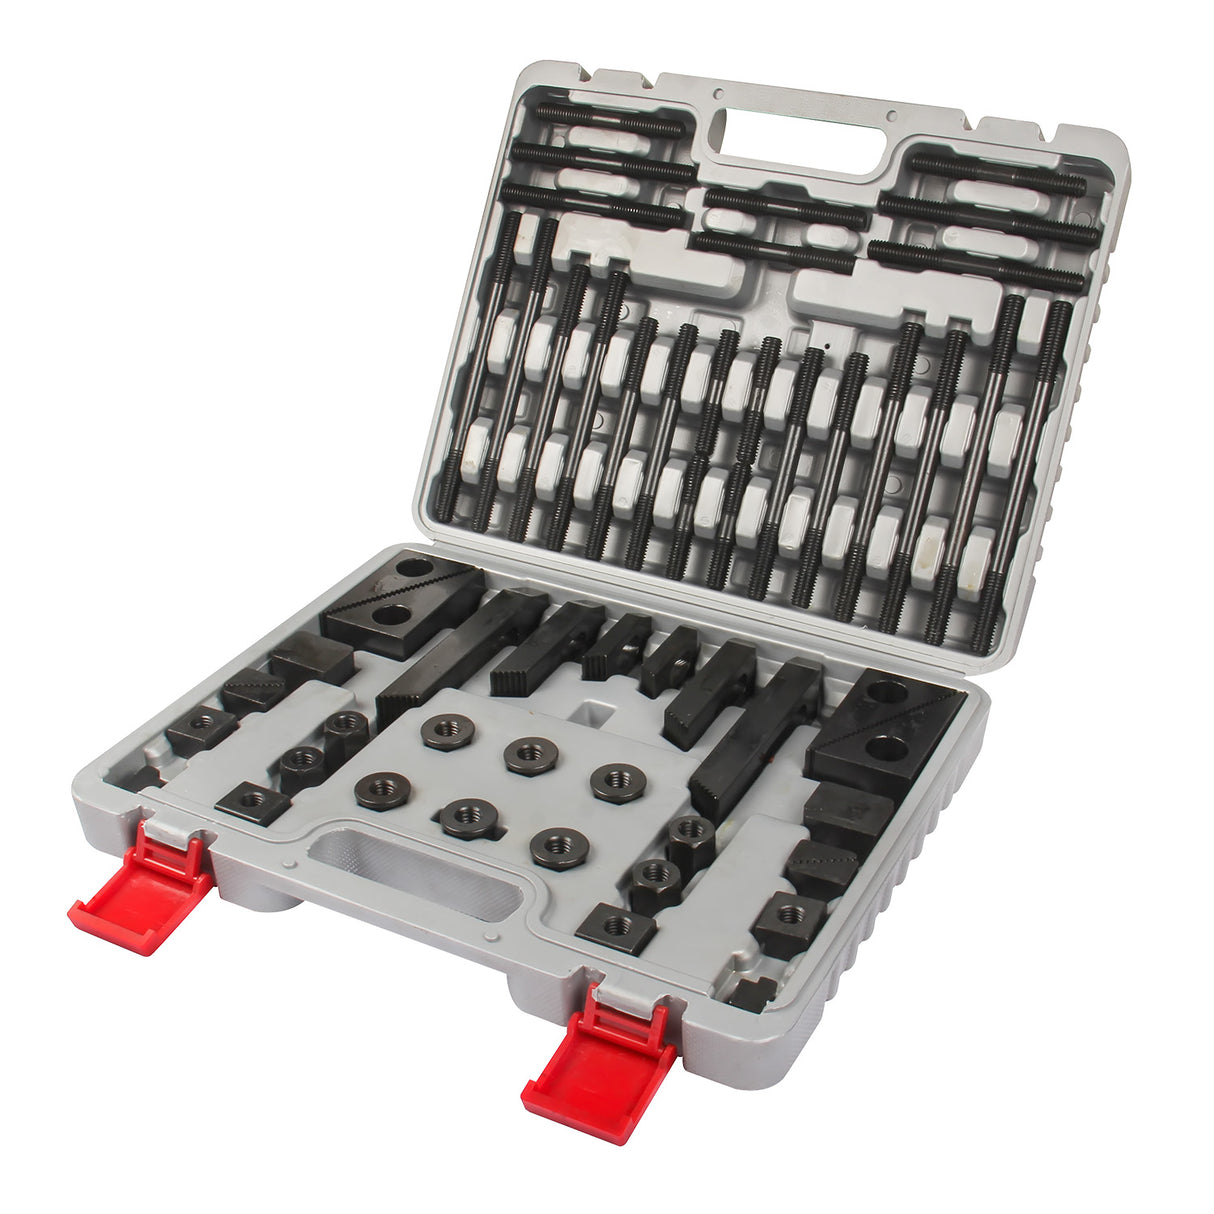 KAKA INDUSTRIAL 5/8" Table Slot 1/2" Stud Szie 52pcs Clamping Kit Set with case holder